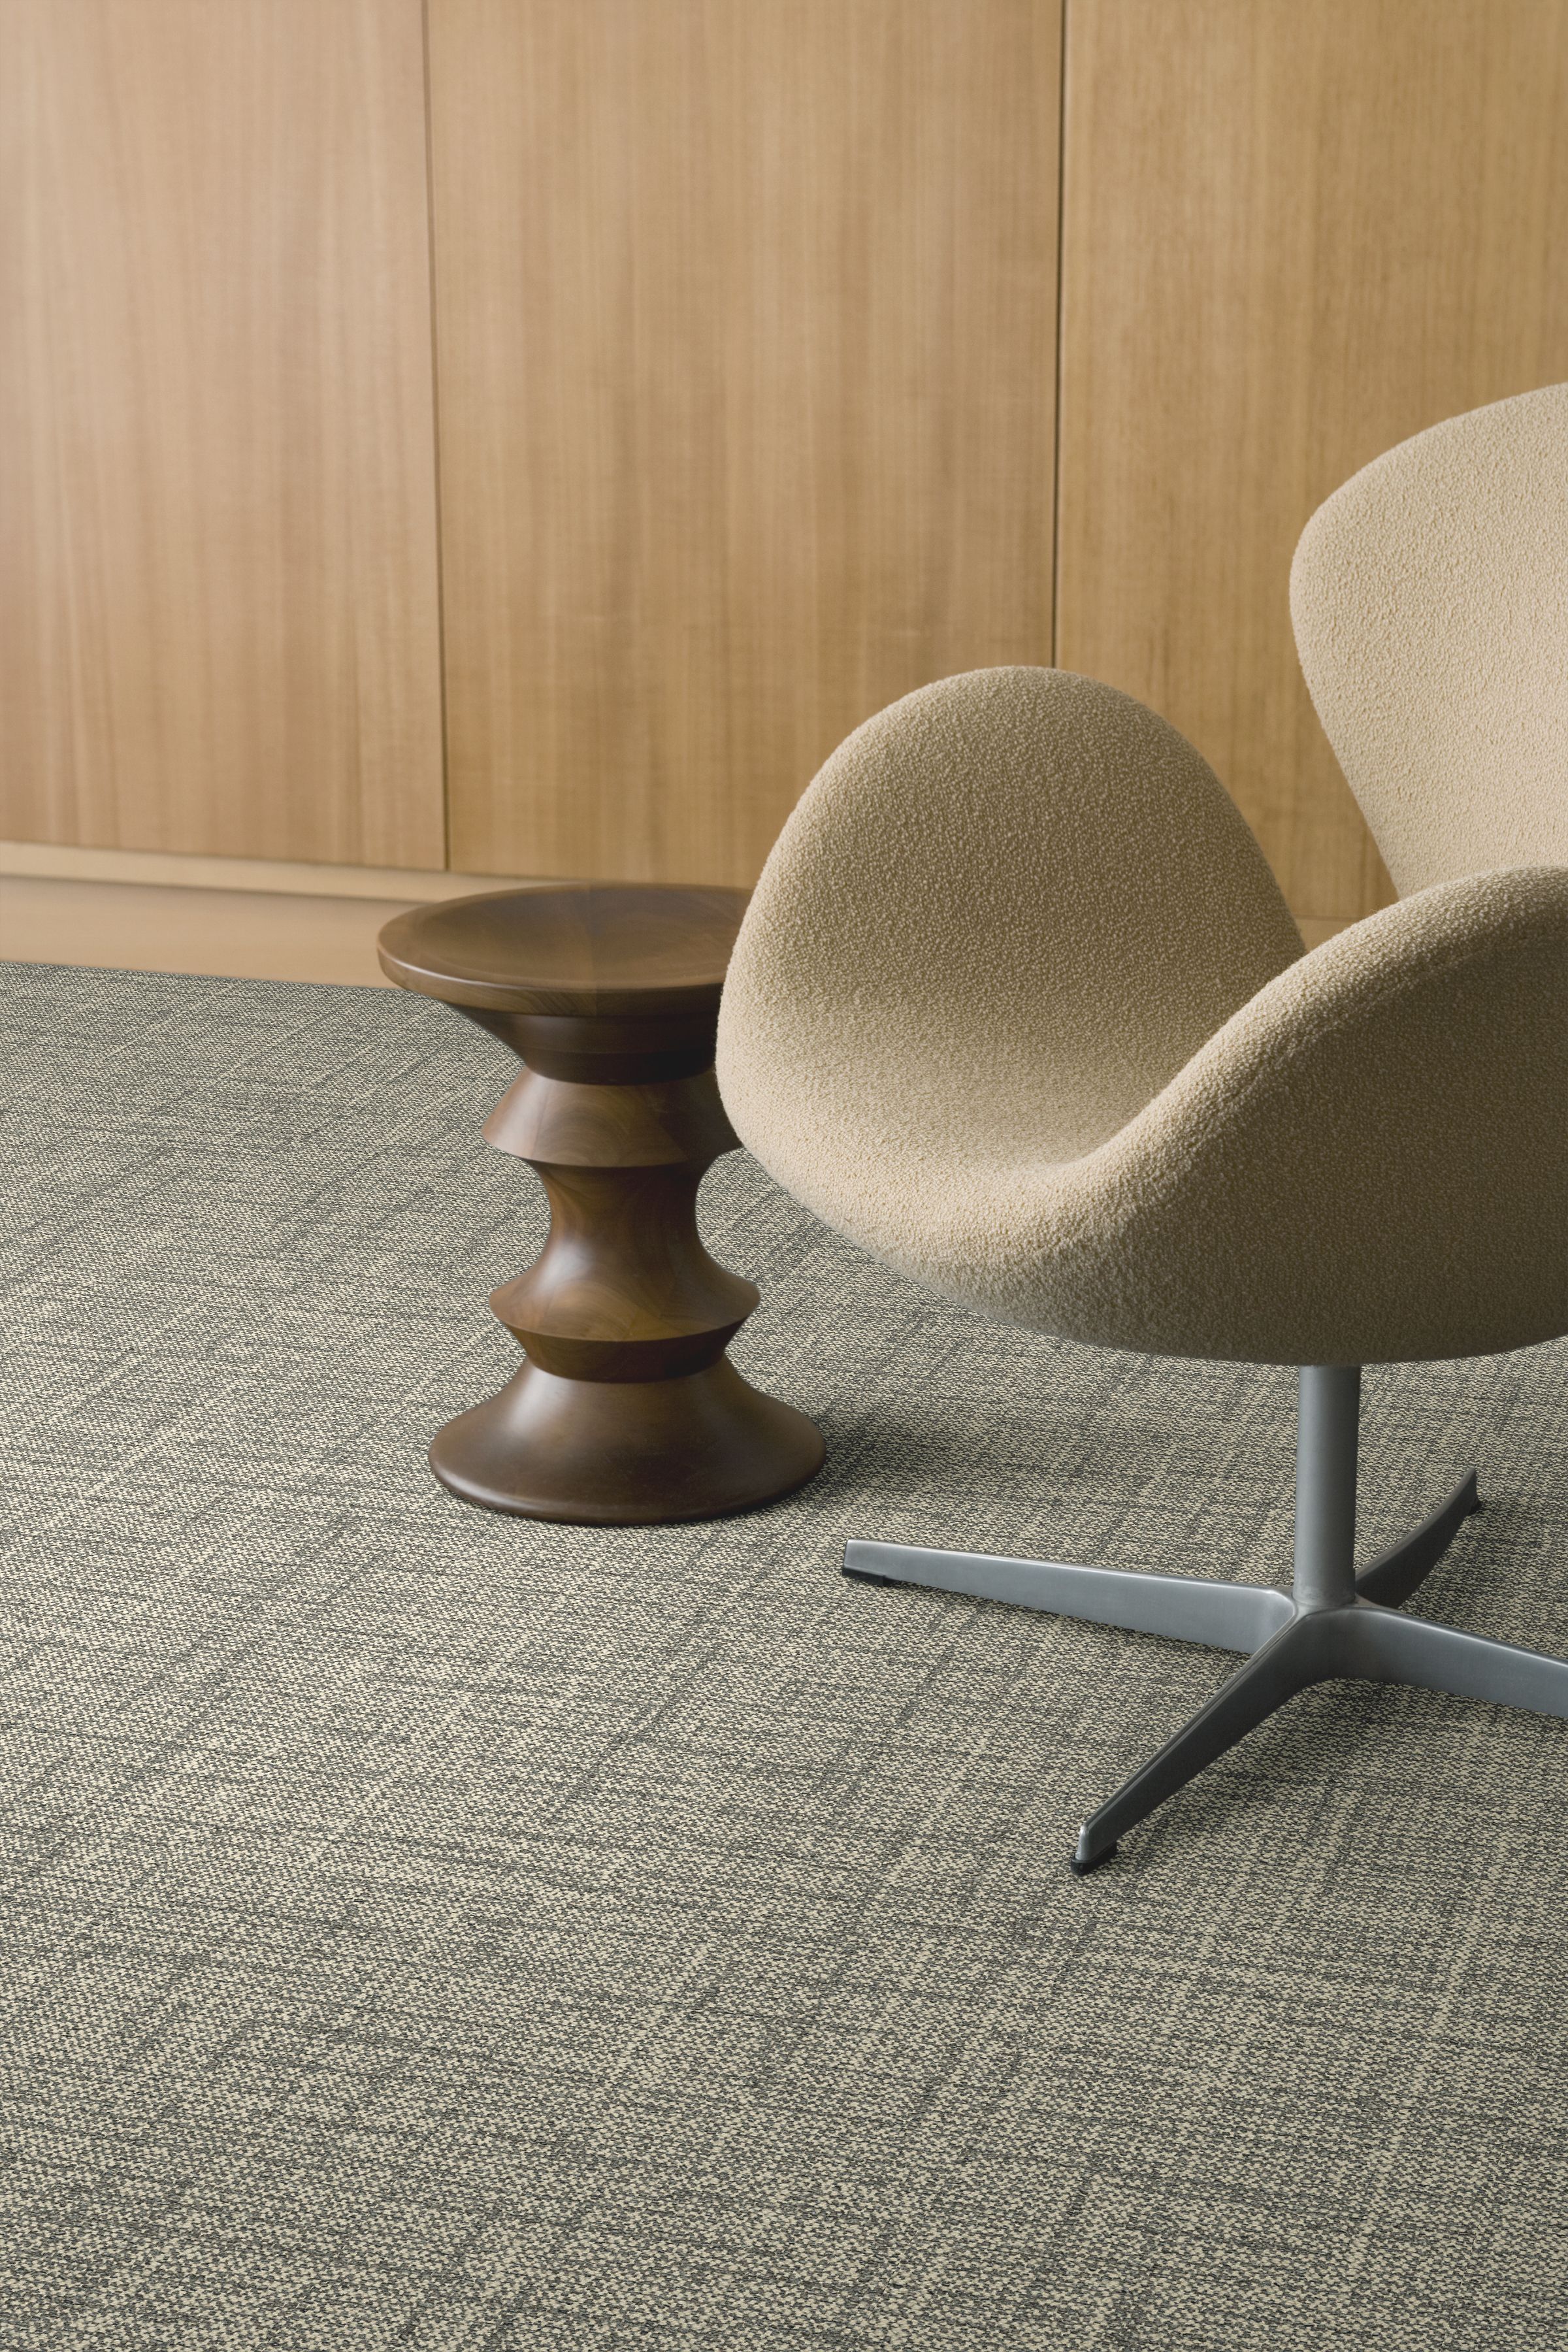 Interface Diminuendo plank carpet tile in close up with chair and small side table imagen número 4